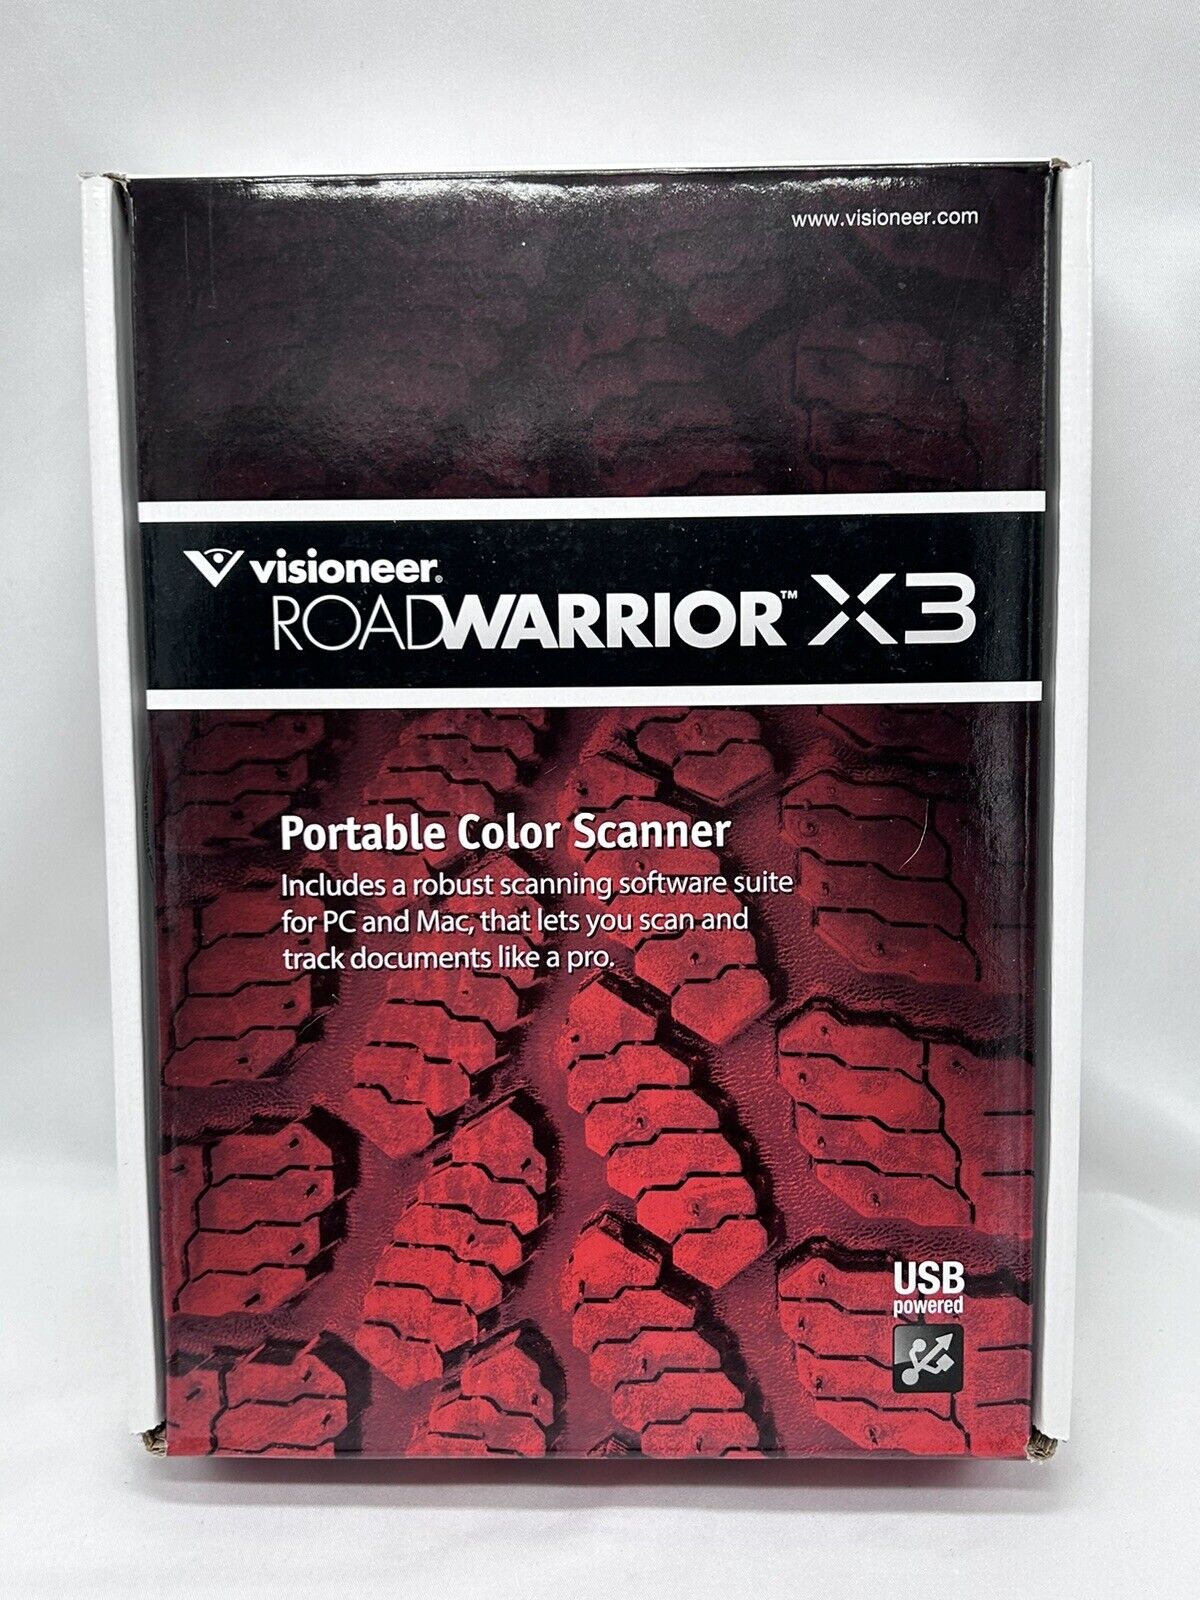 Visioneer RoadWarrior X3 Portable Color Scanner for PC and Mac - New Open Box